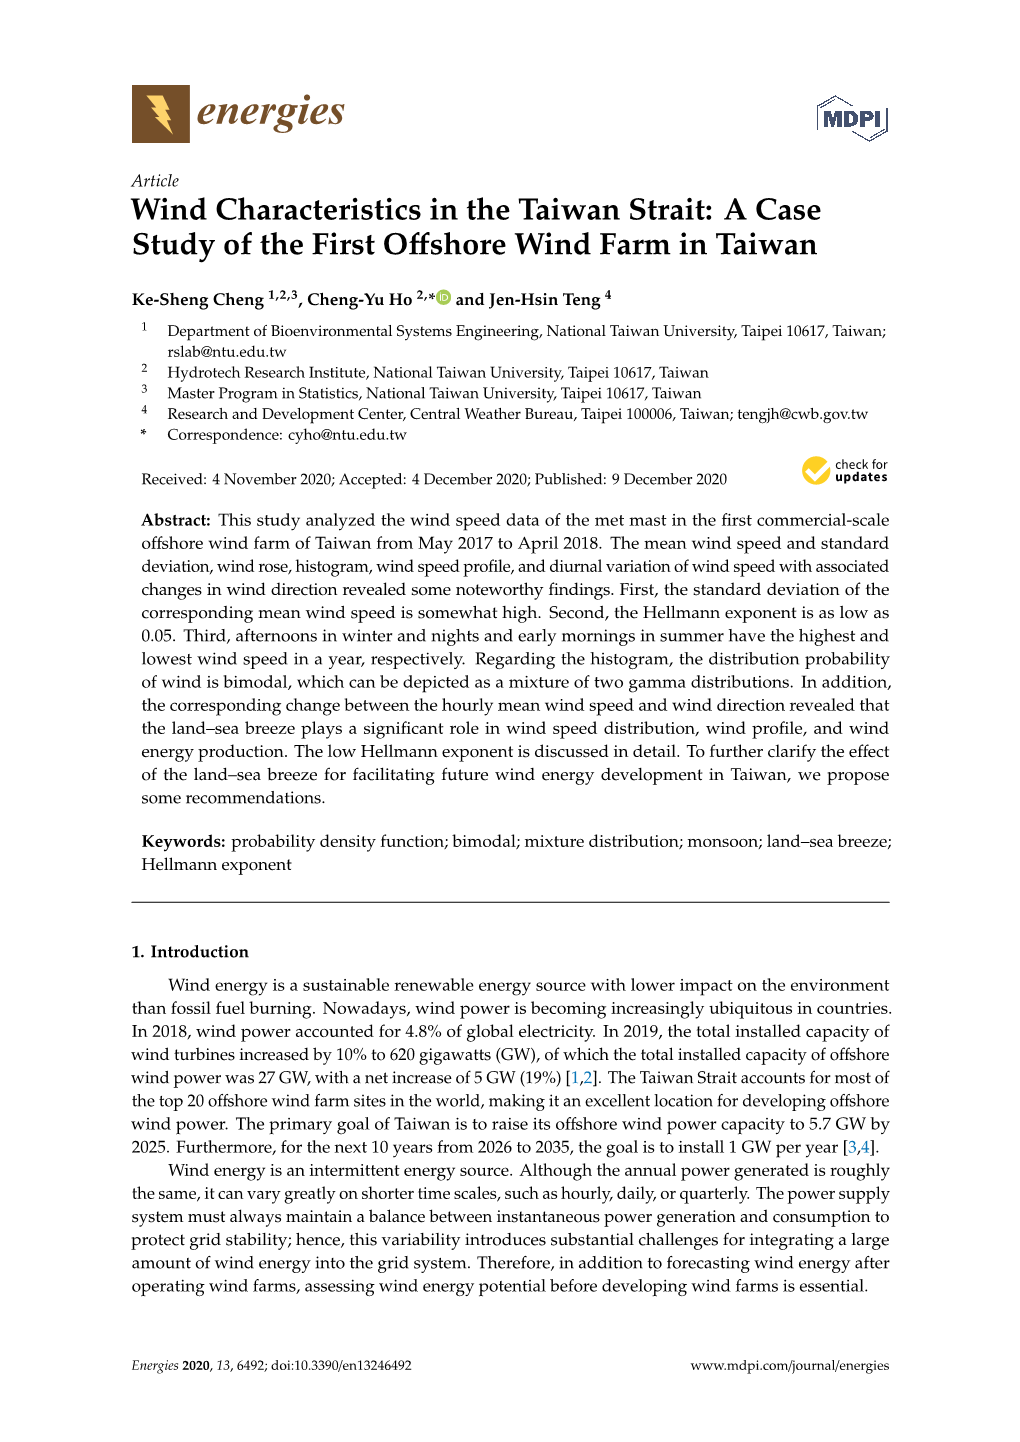 Wind Characteristics in the Taiwan Strait: a Case Study of the First Oﬀshore Wind Farm in Taiwan